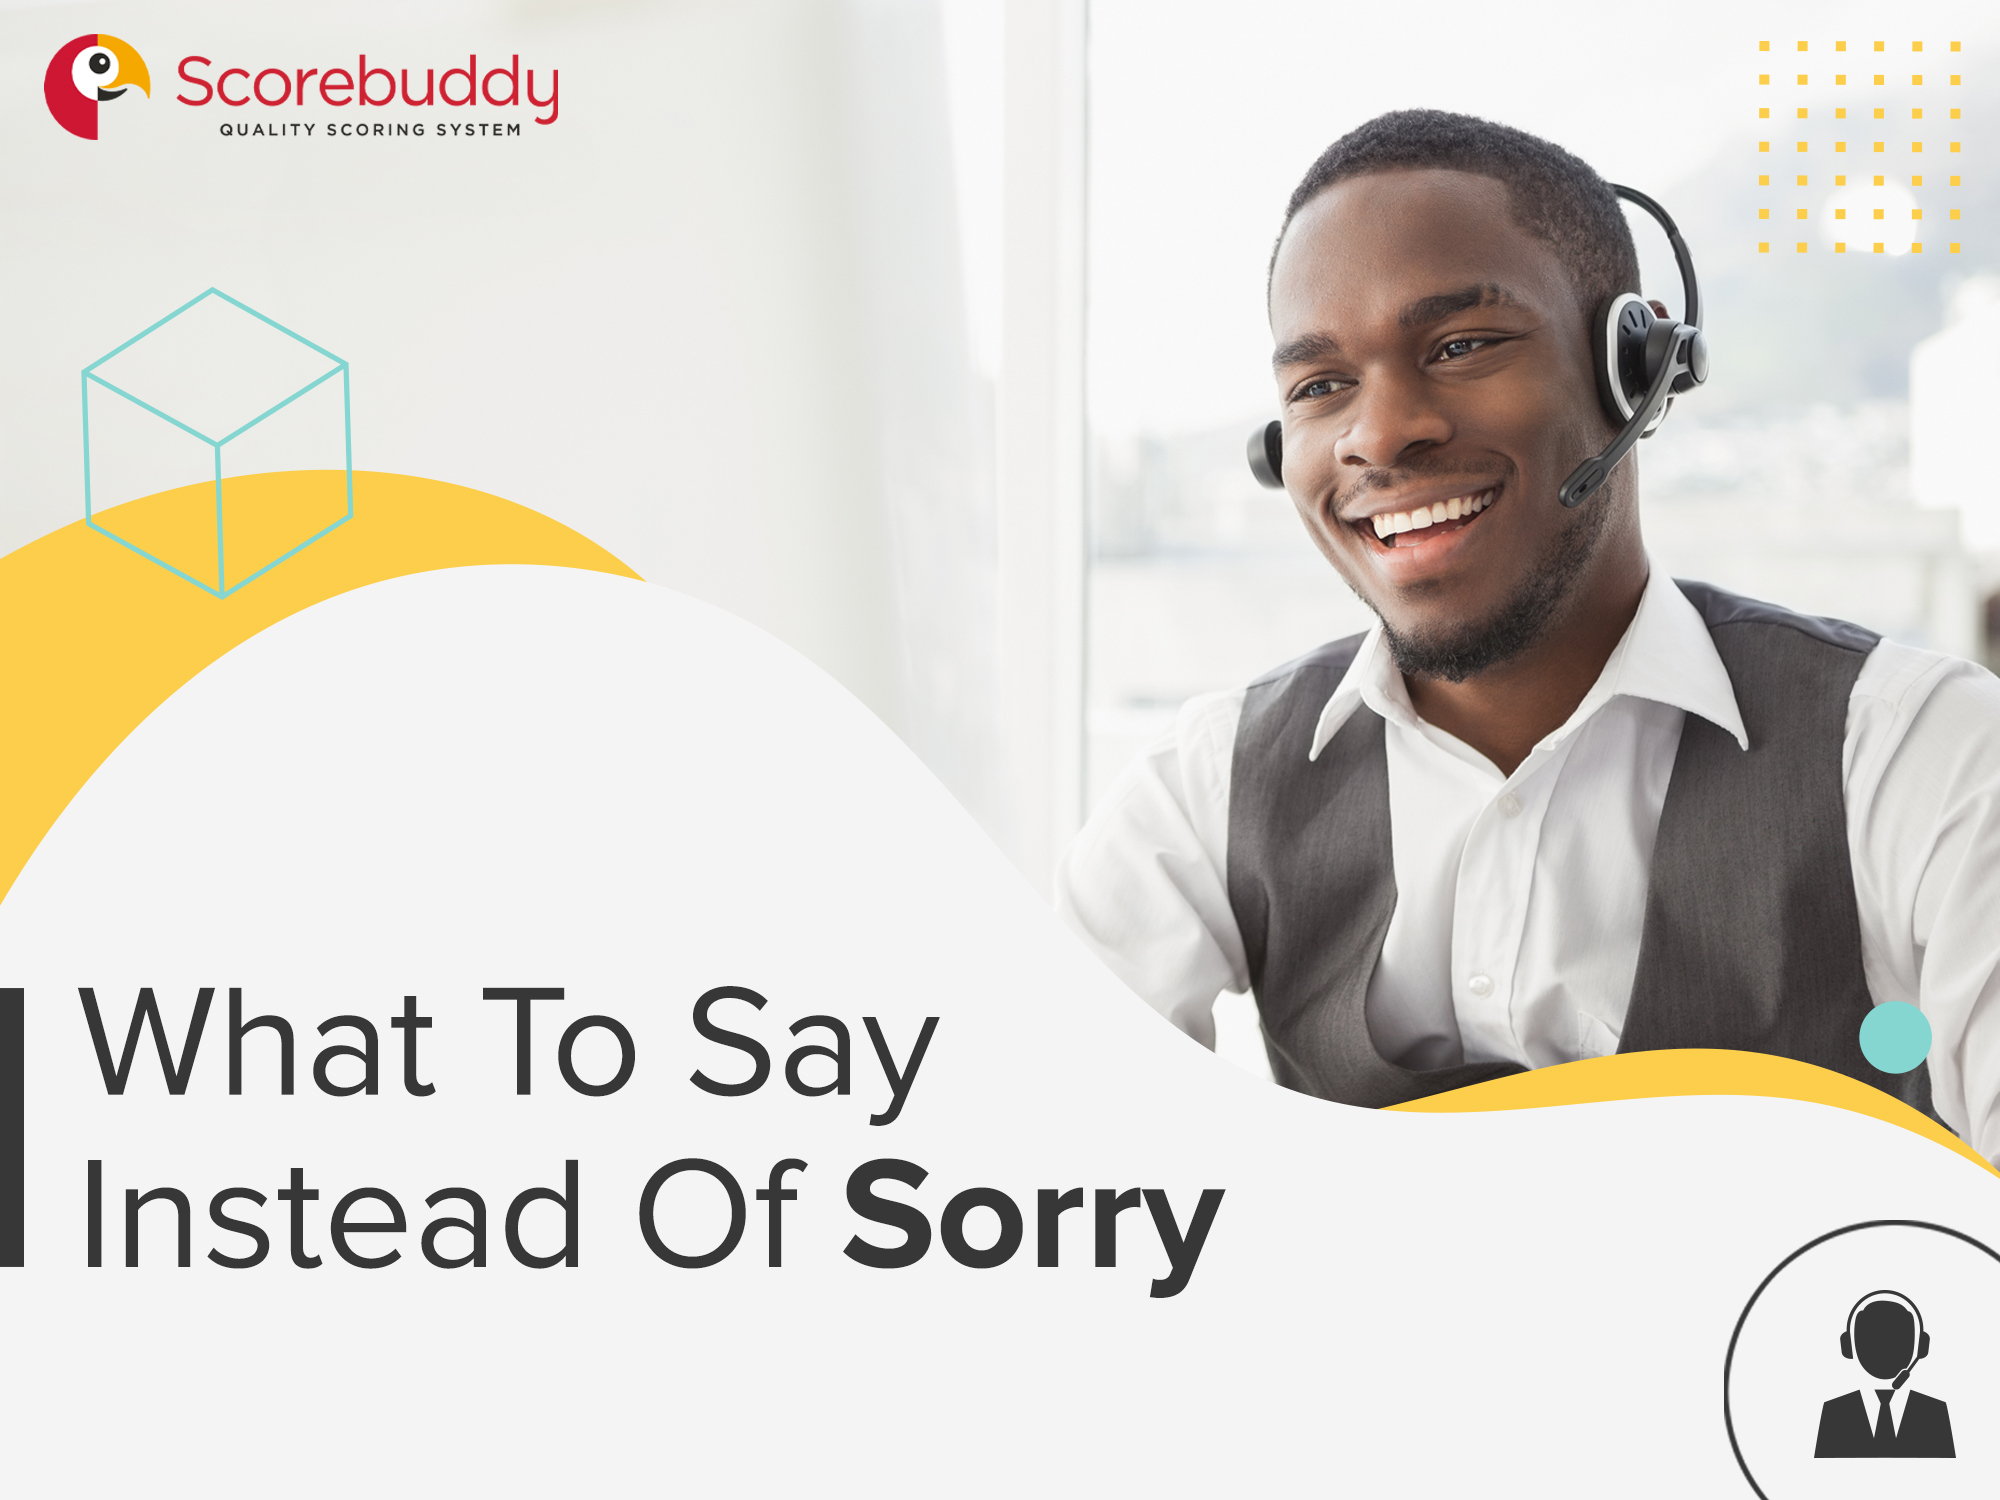 What to Say Instead of Sorry & 7 Tips For an Effective Apology